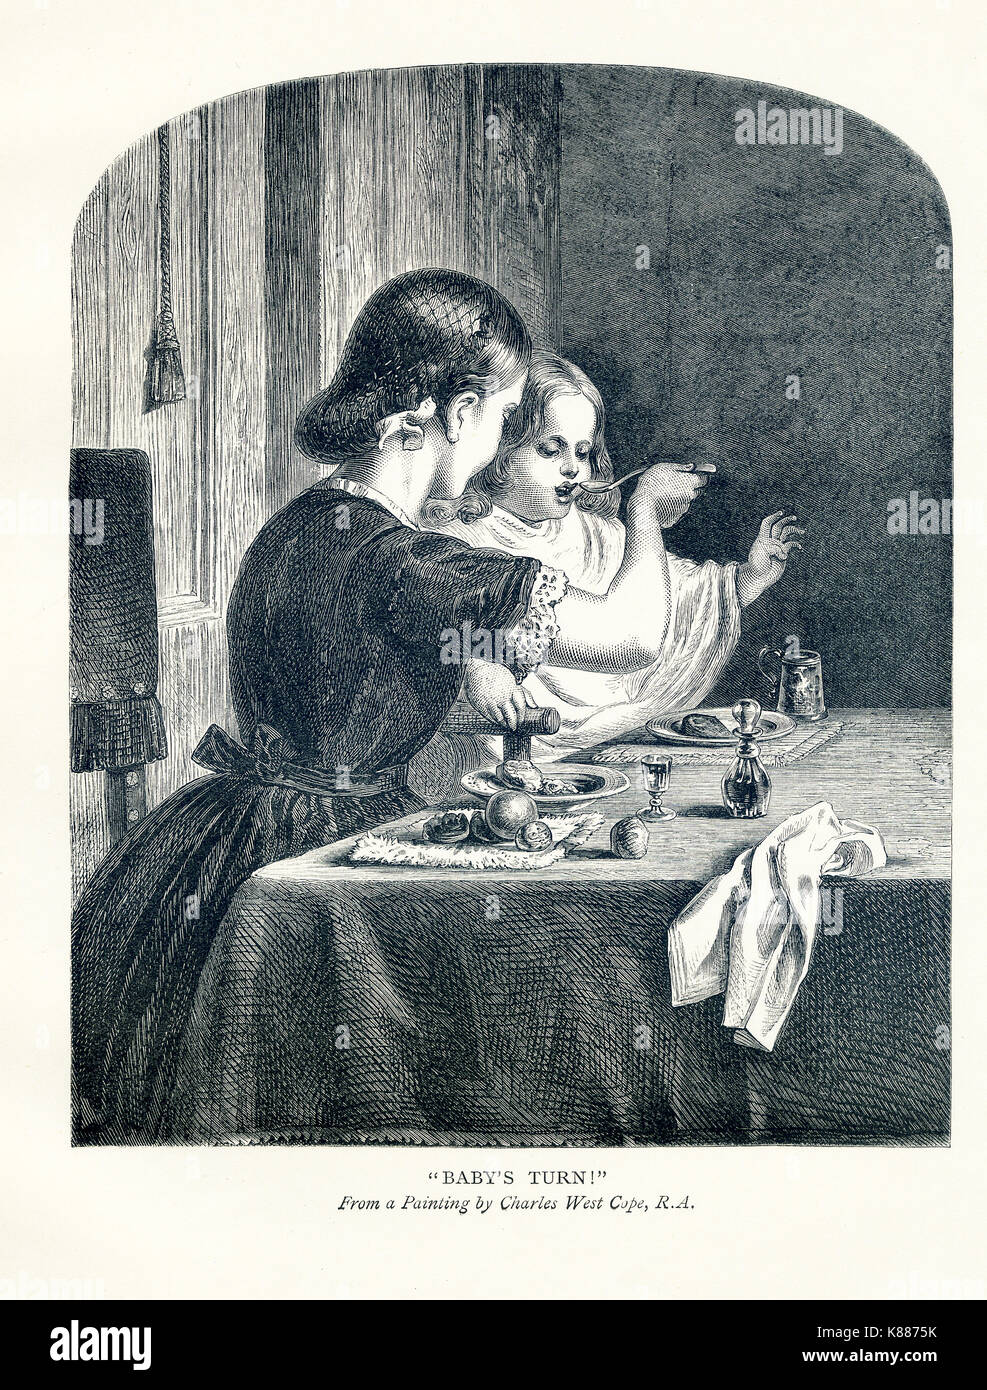 This engraving on wood accompanied an 1881 book on British Painters. The title is 'Baby's Turn,' and it is by Charles West Cope (1811-1890), a leading English Victorian-era painter of genre and history scenes. Stock Photo